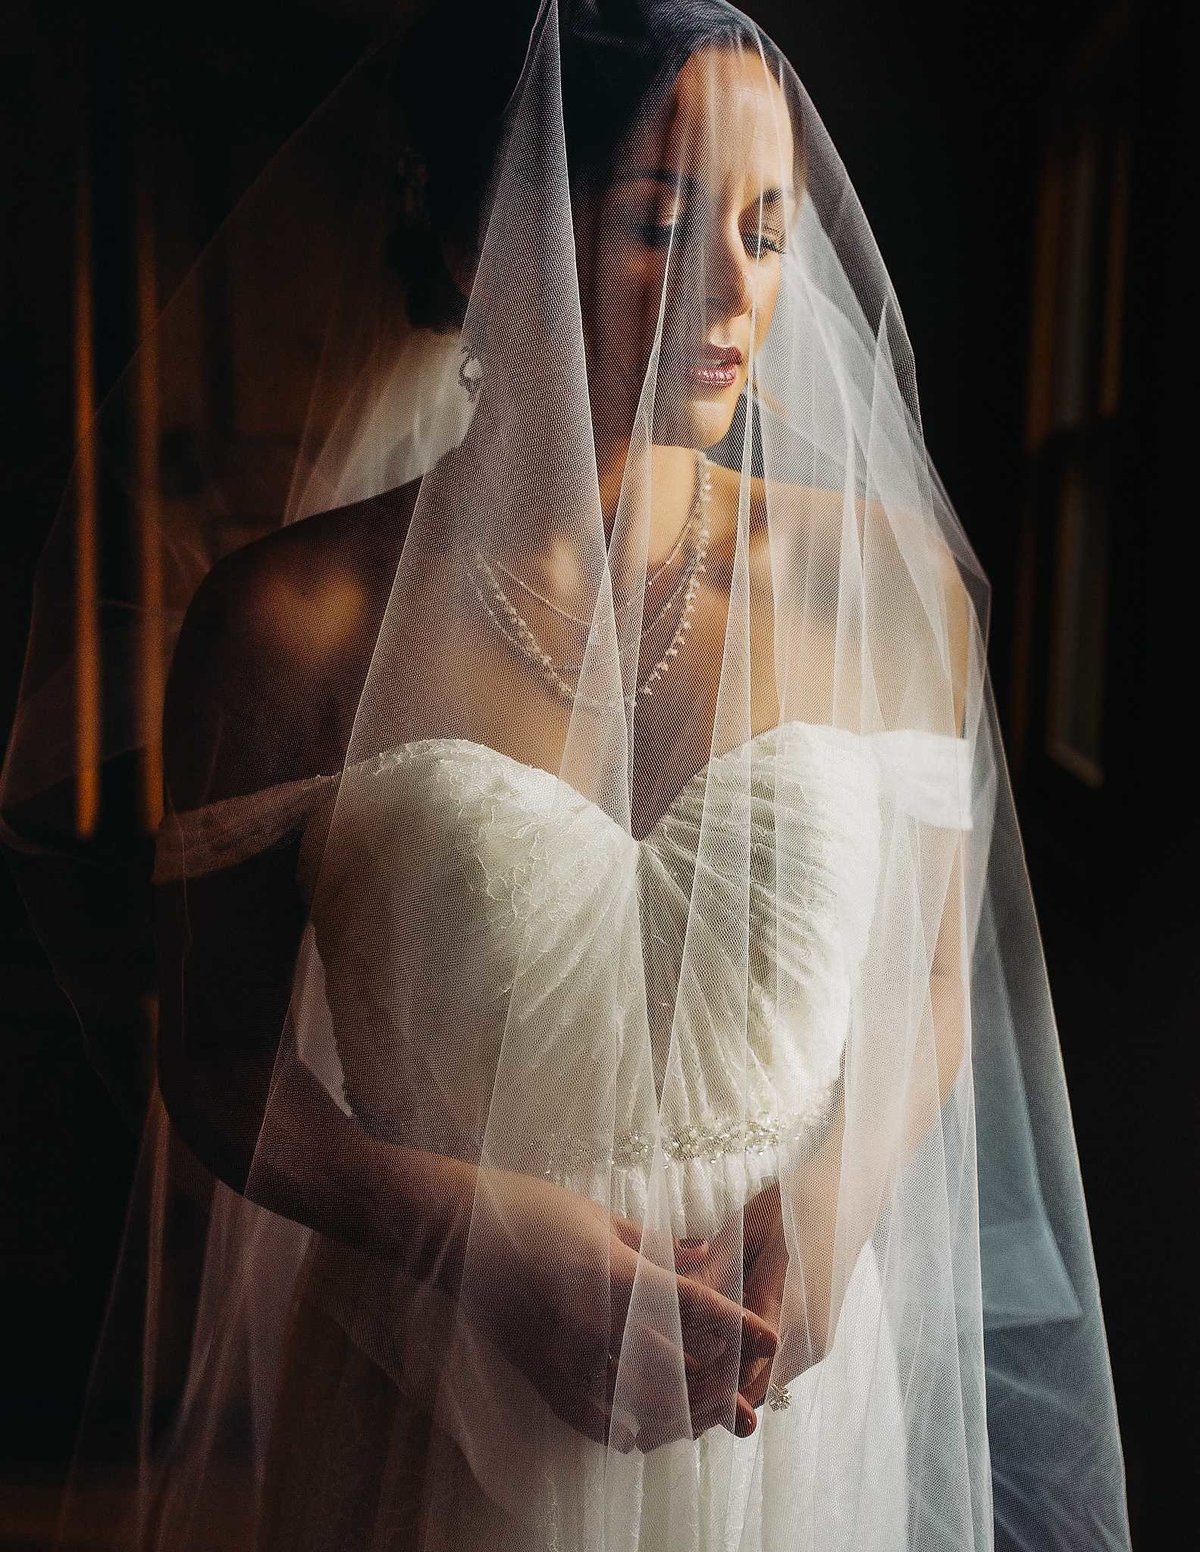 Bride-with-veil-classic-portrait-charleston-Wedding-Photographers-in-Charleston-SC-Fia-Forever-Photography